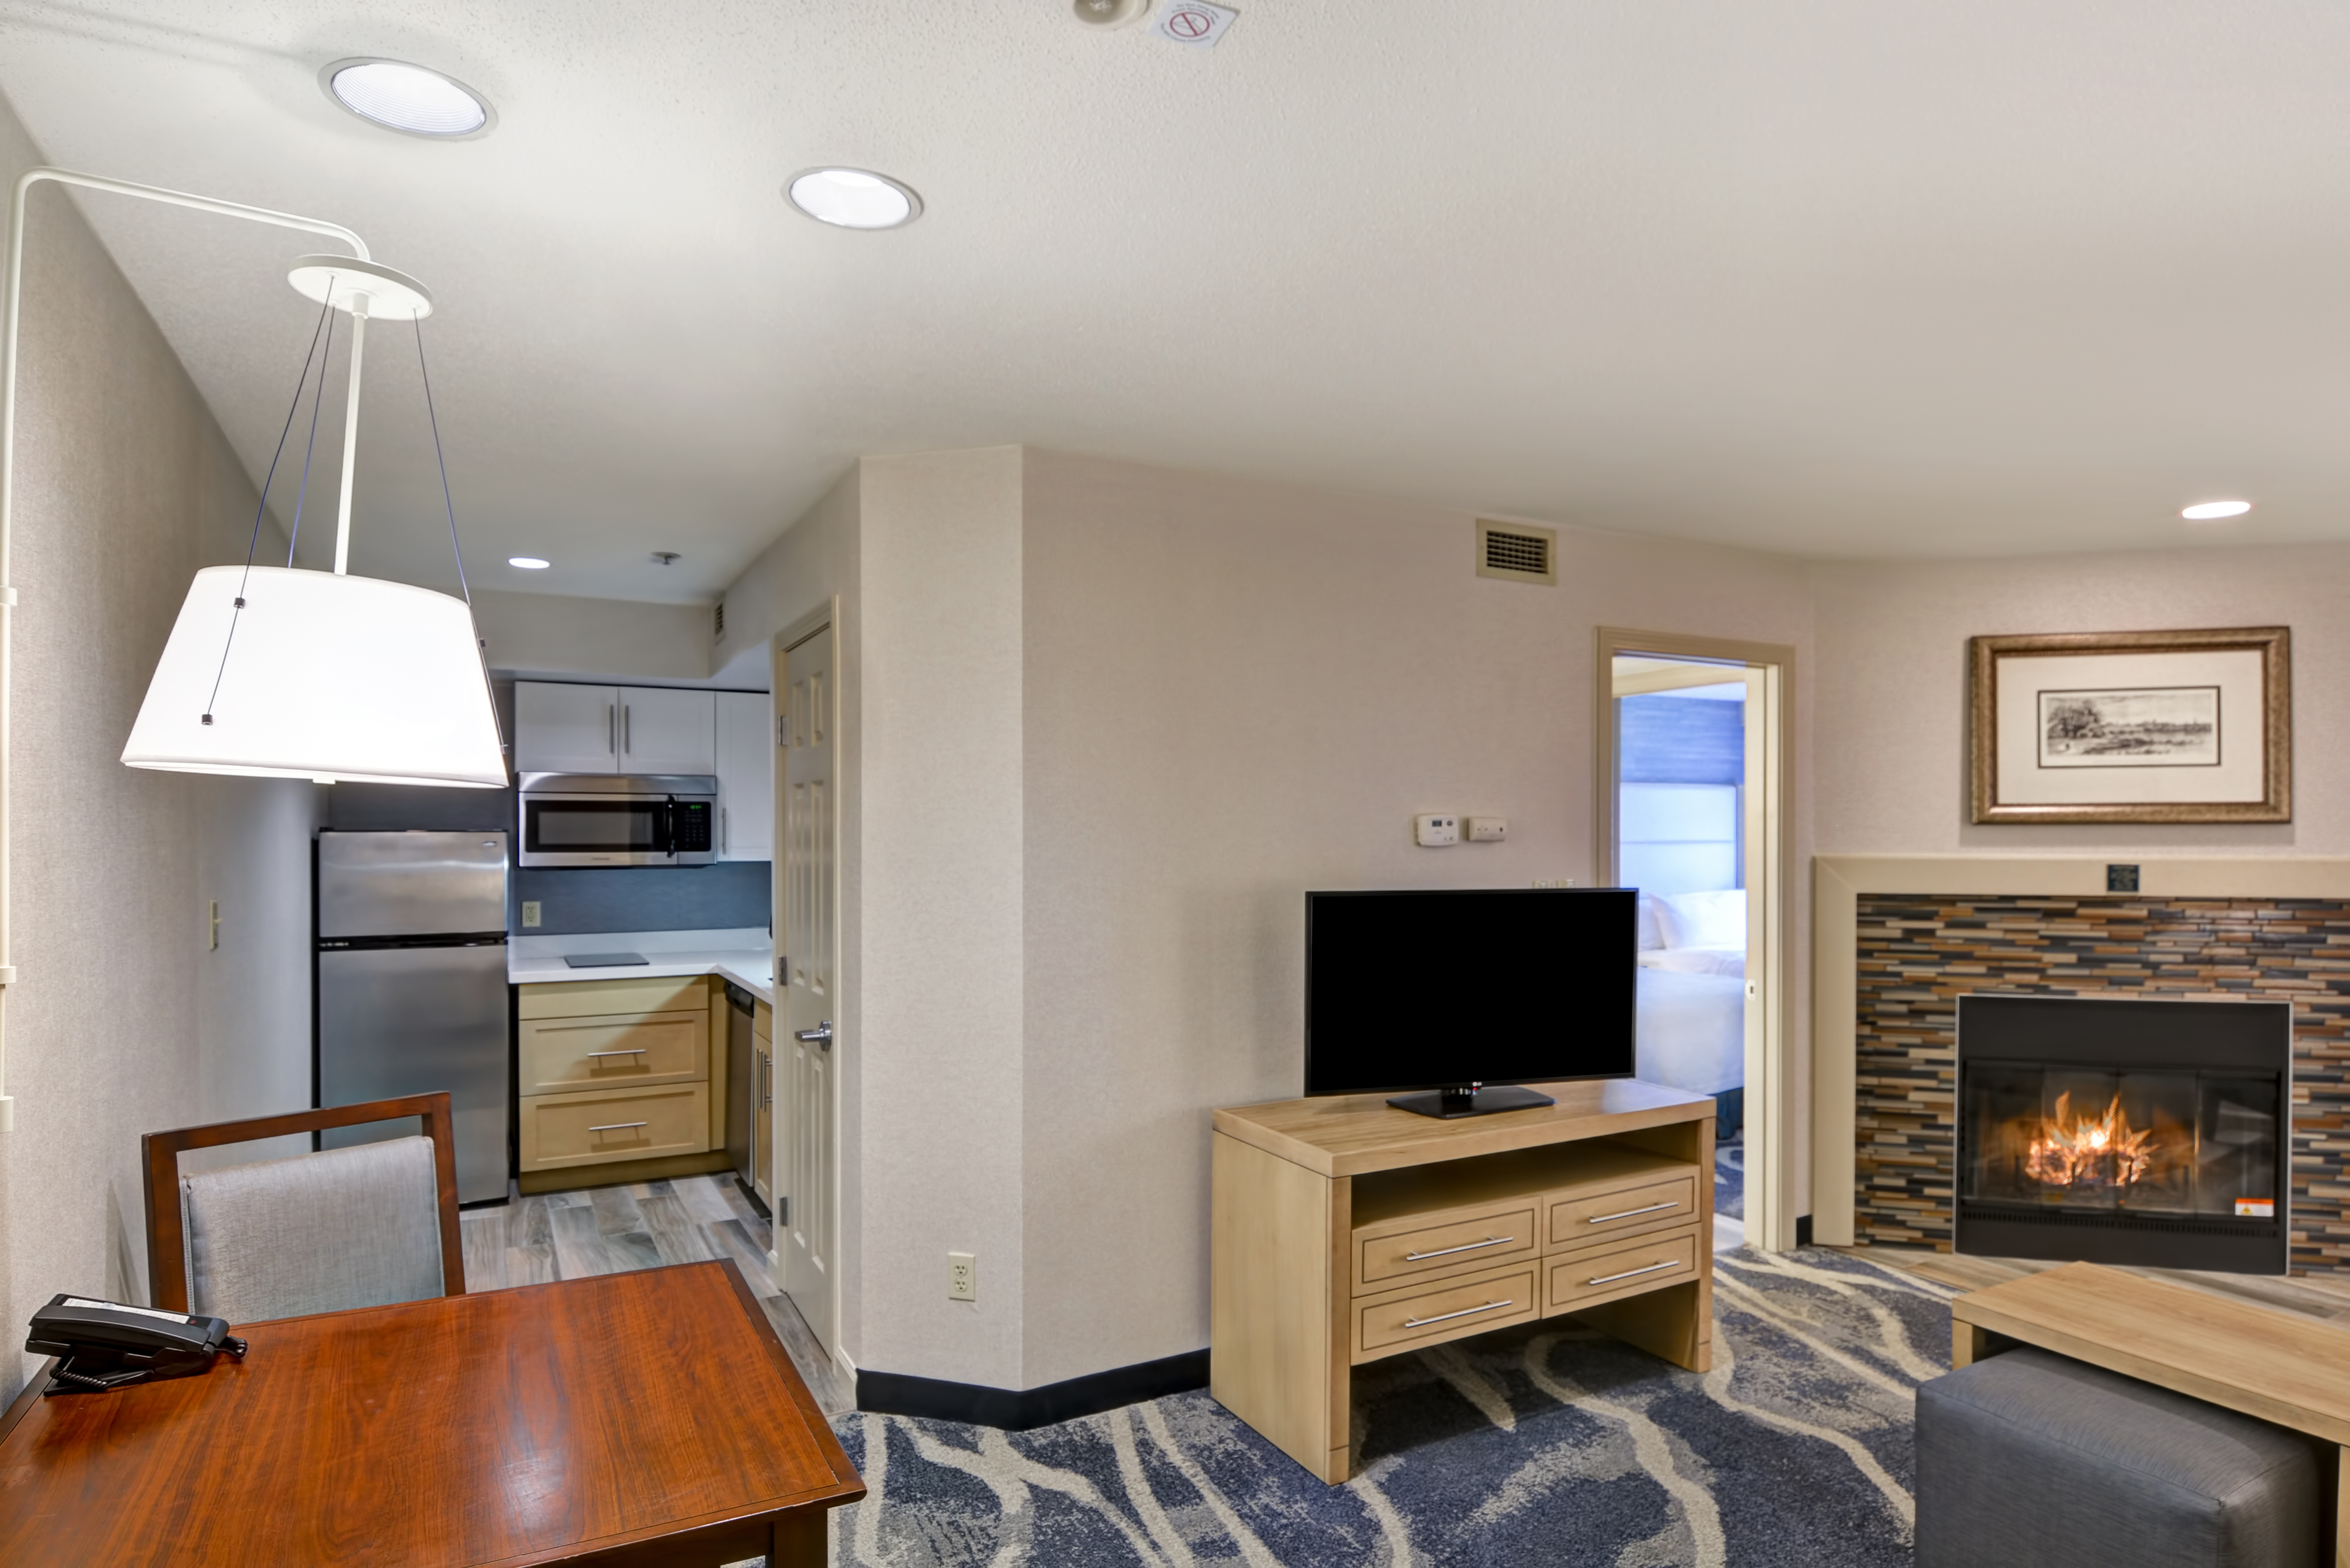 Suite Living, Dining, and Kitchen Areas